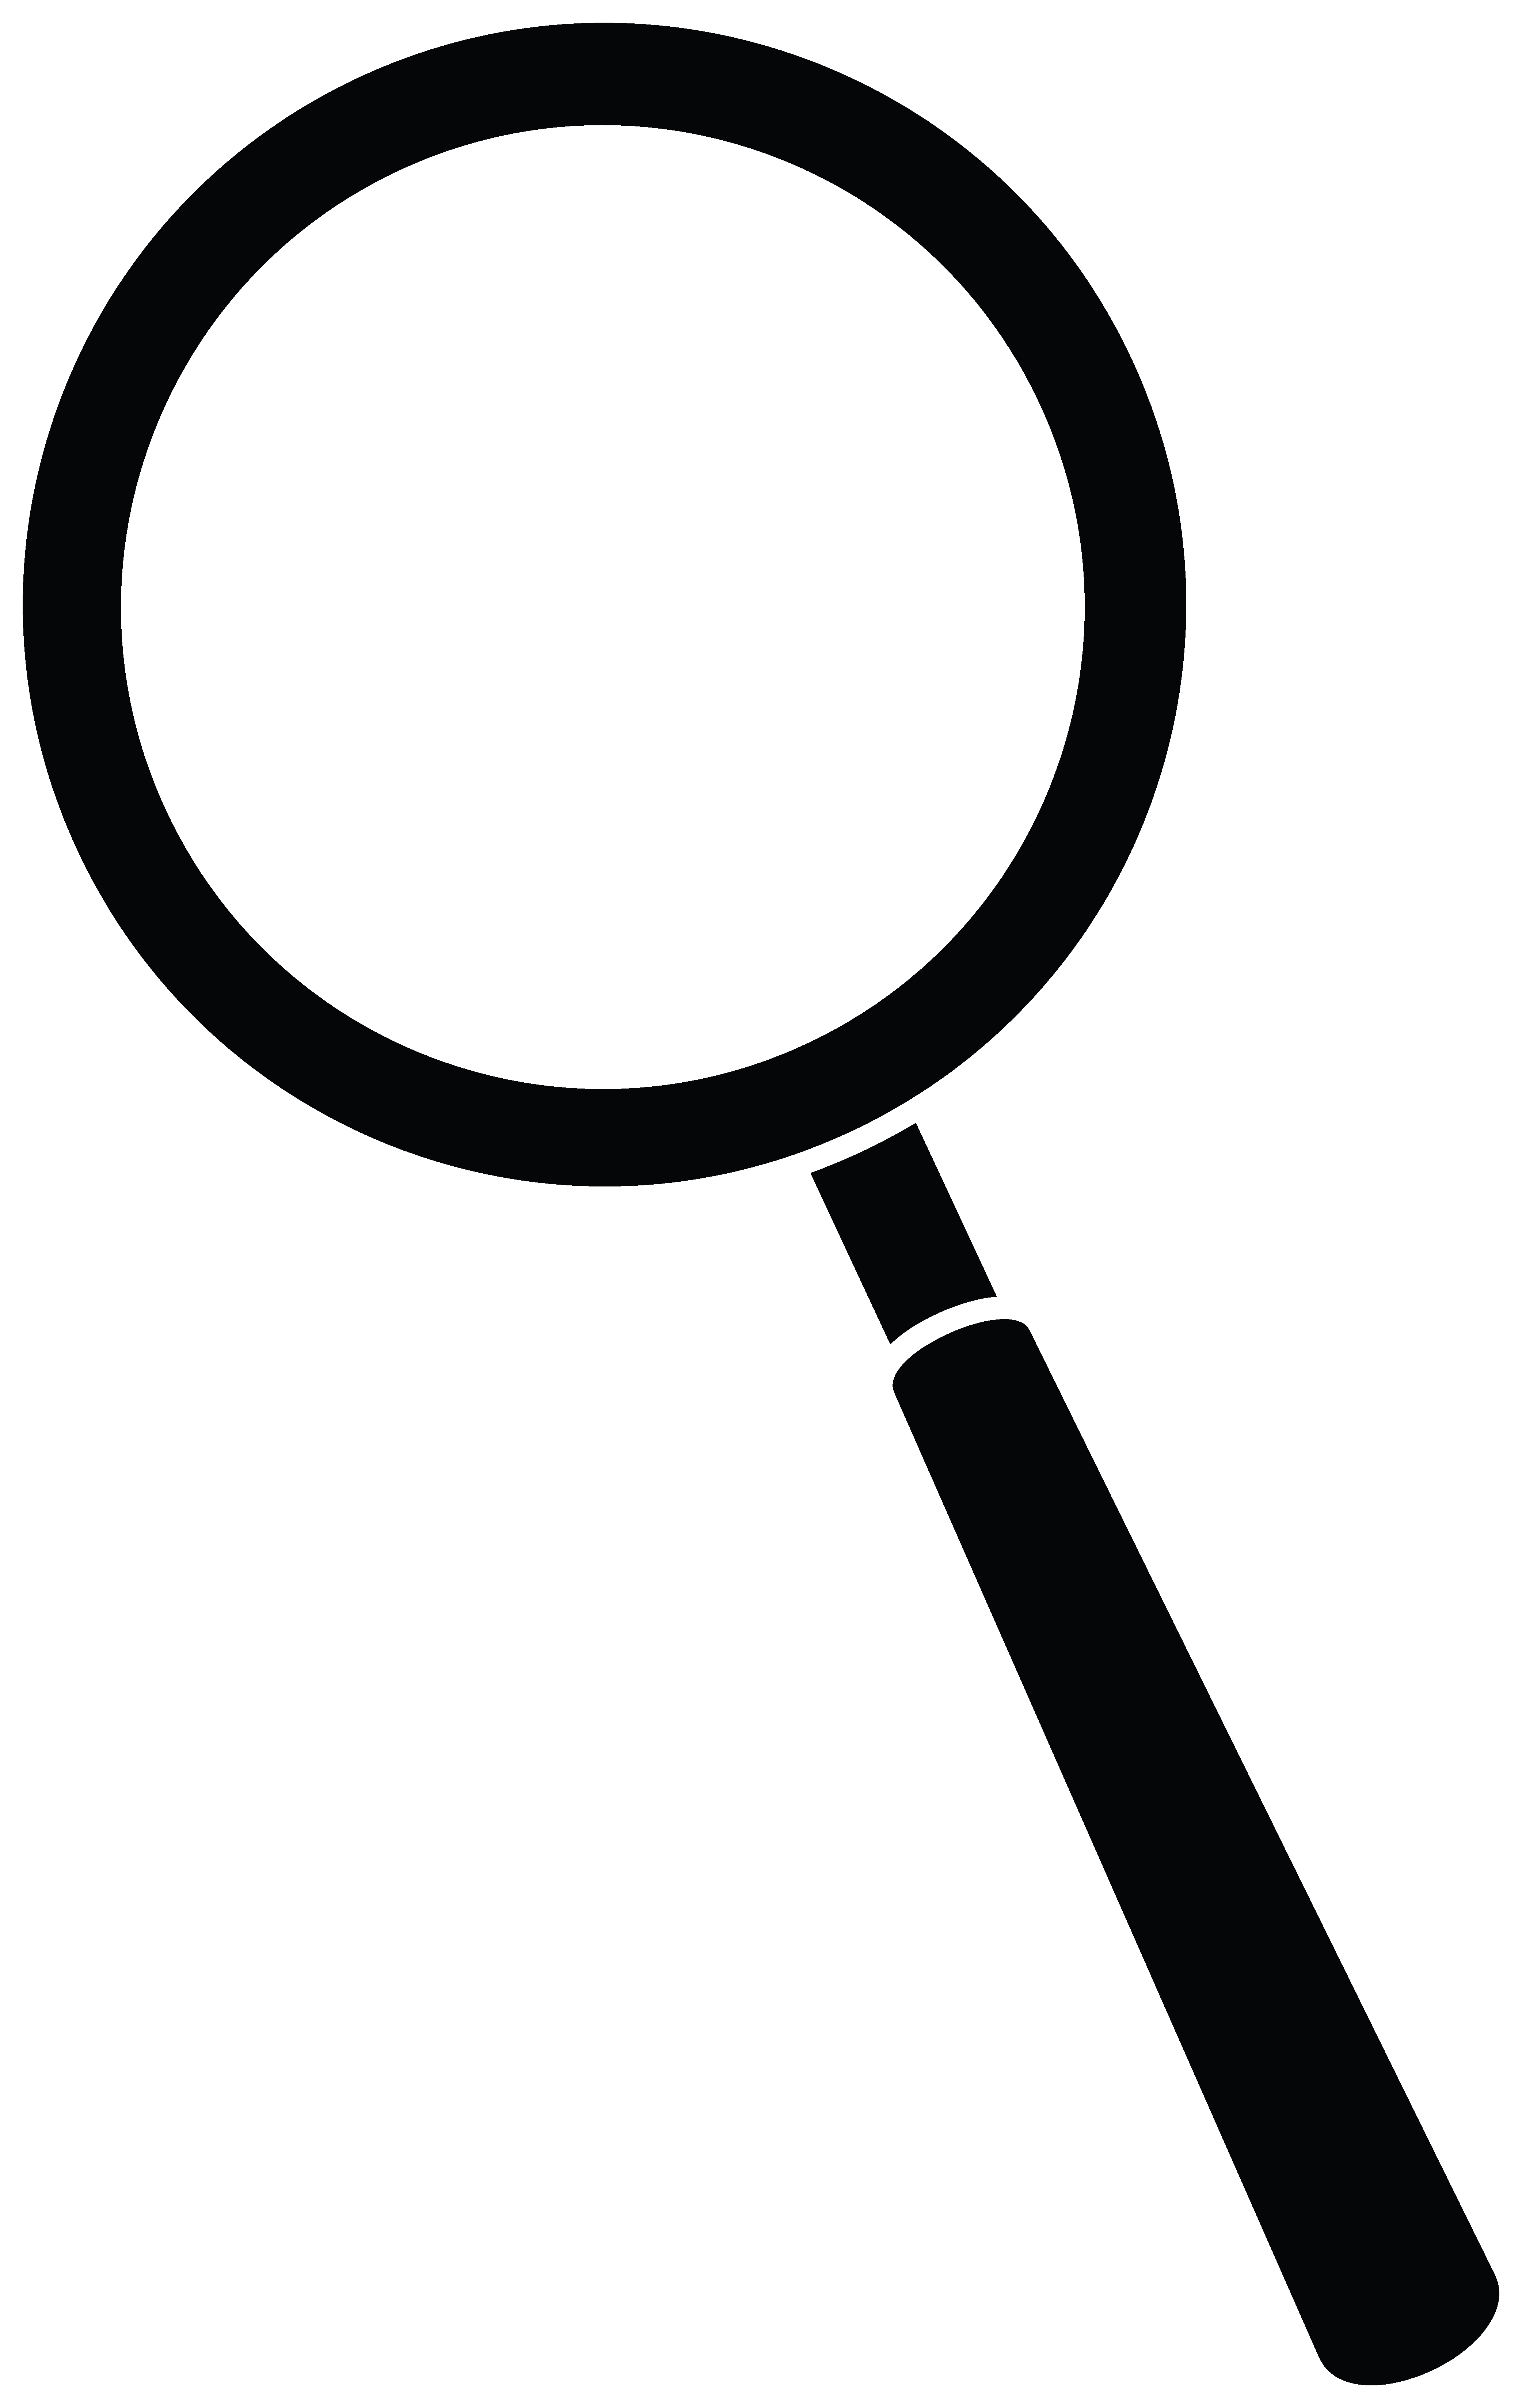 Magnifying glass Clip art